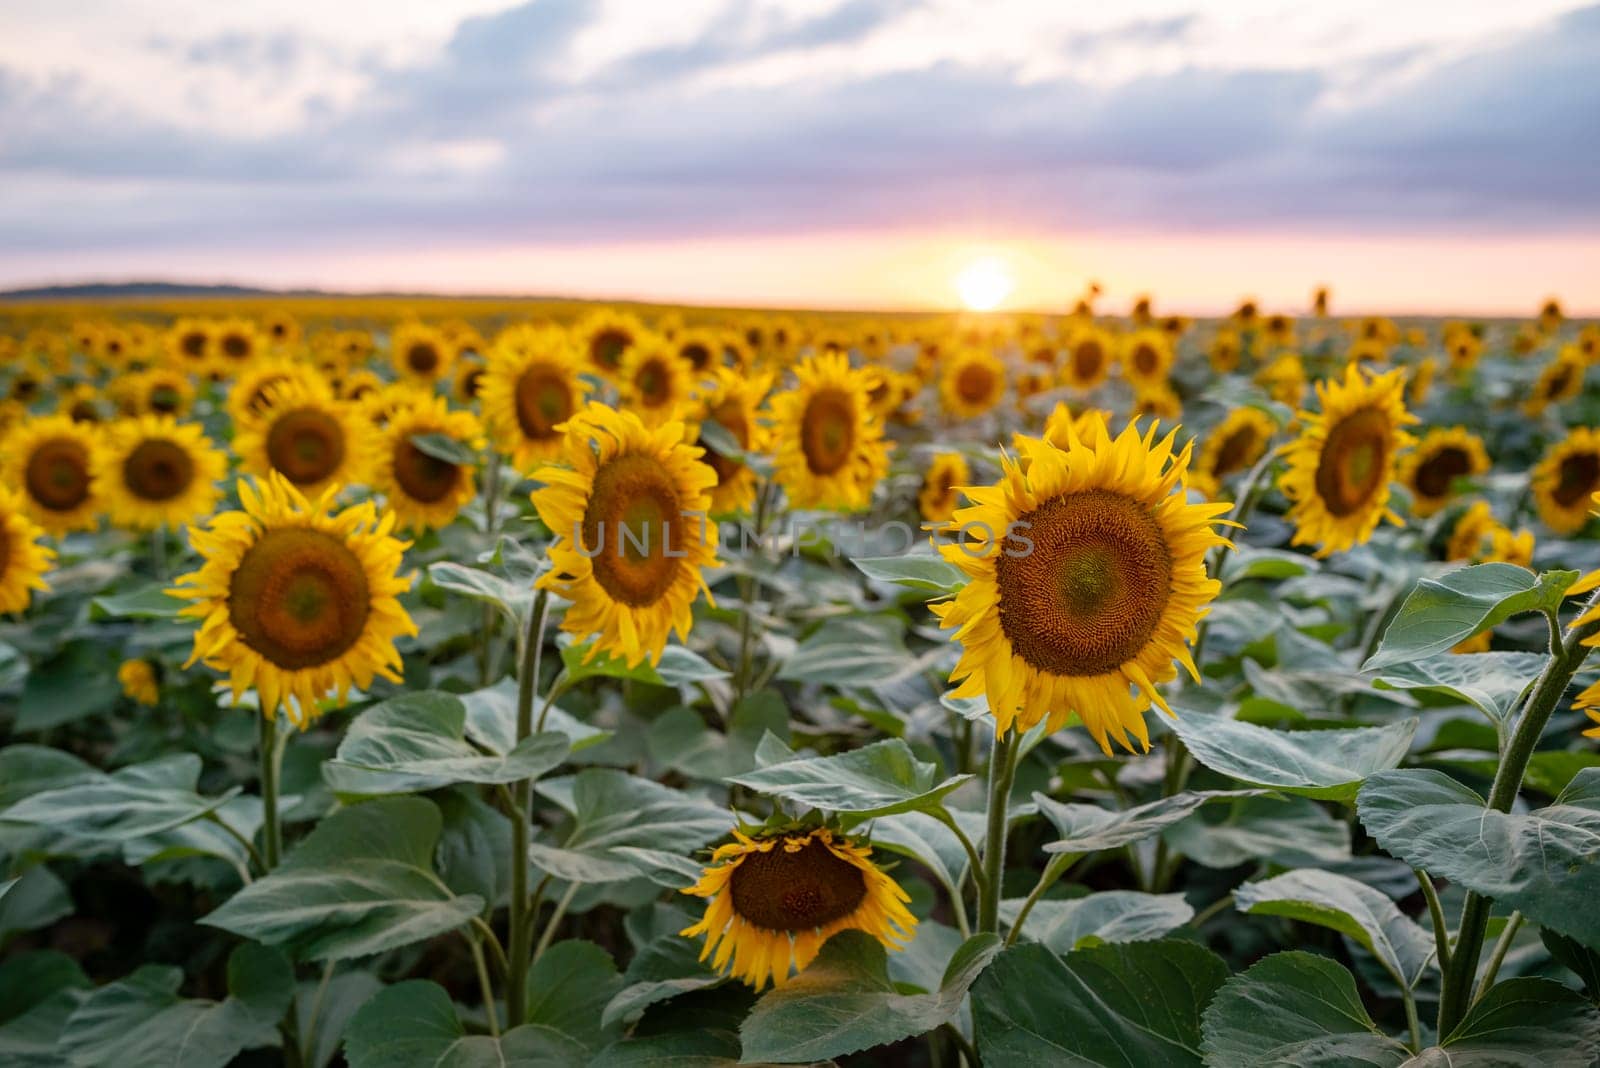 Colorful evening shot of bright sunflowers in full bloom with setting sun on the background